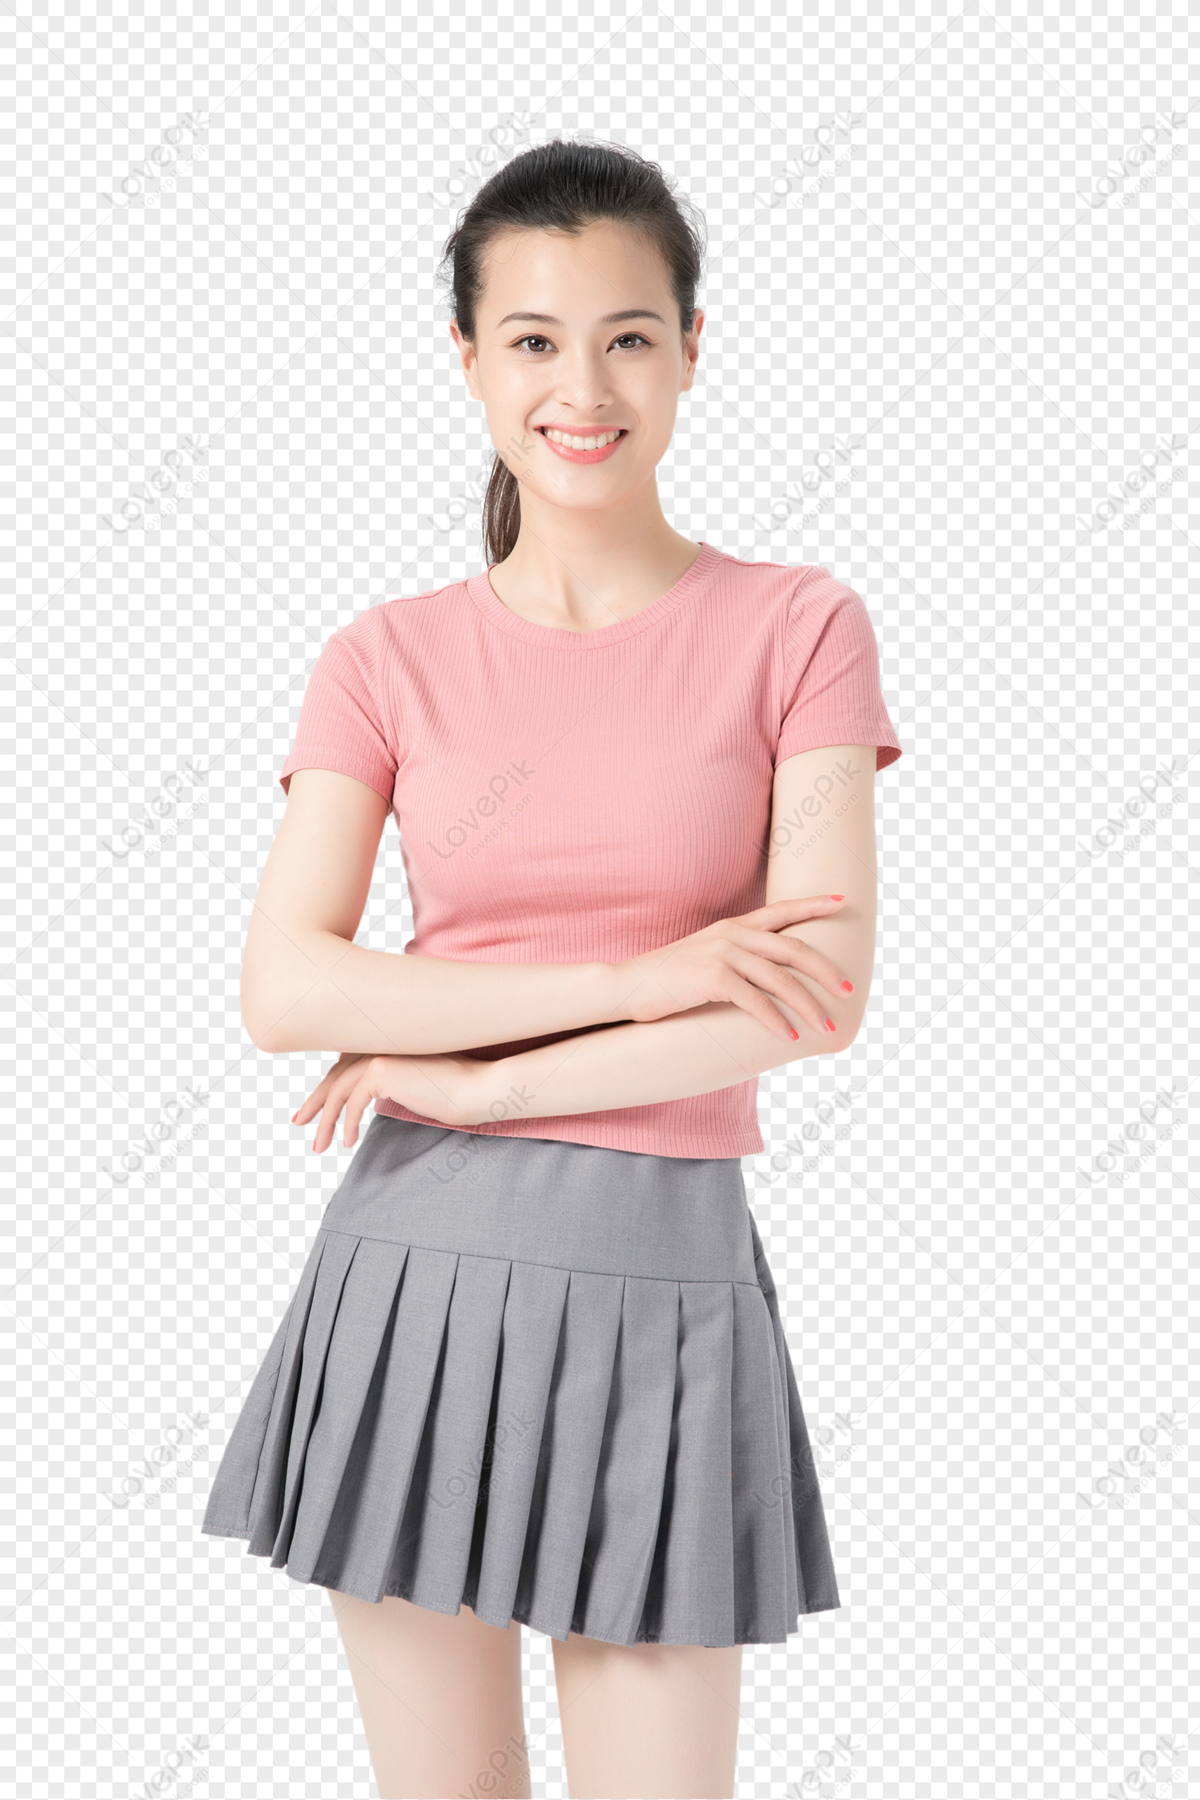 Young Womens Image Display PNG Transparent Image And Clipart Image For ...